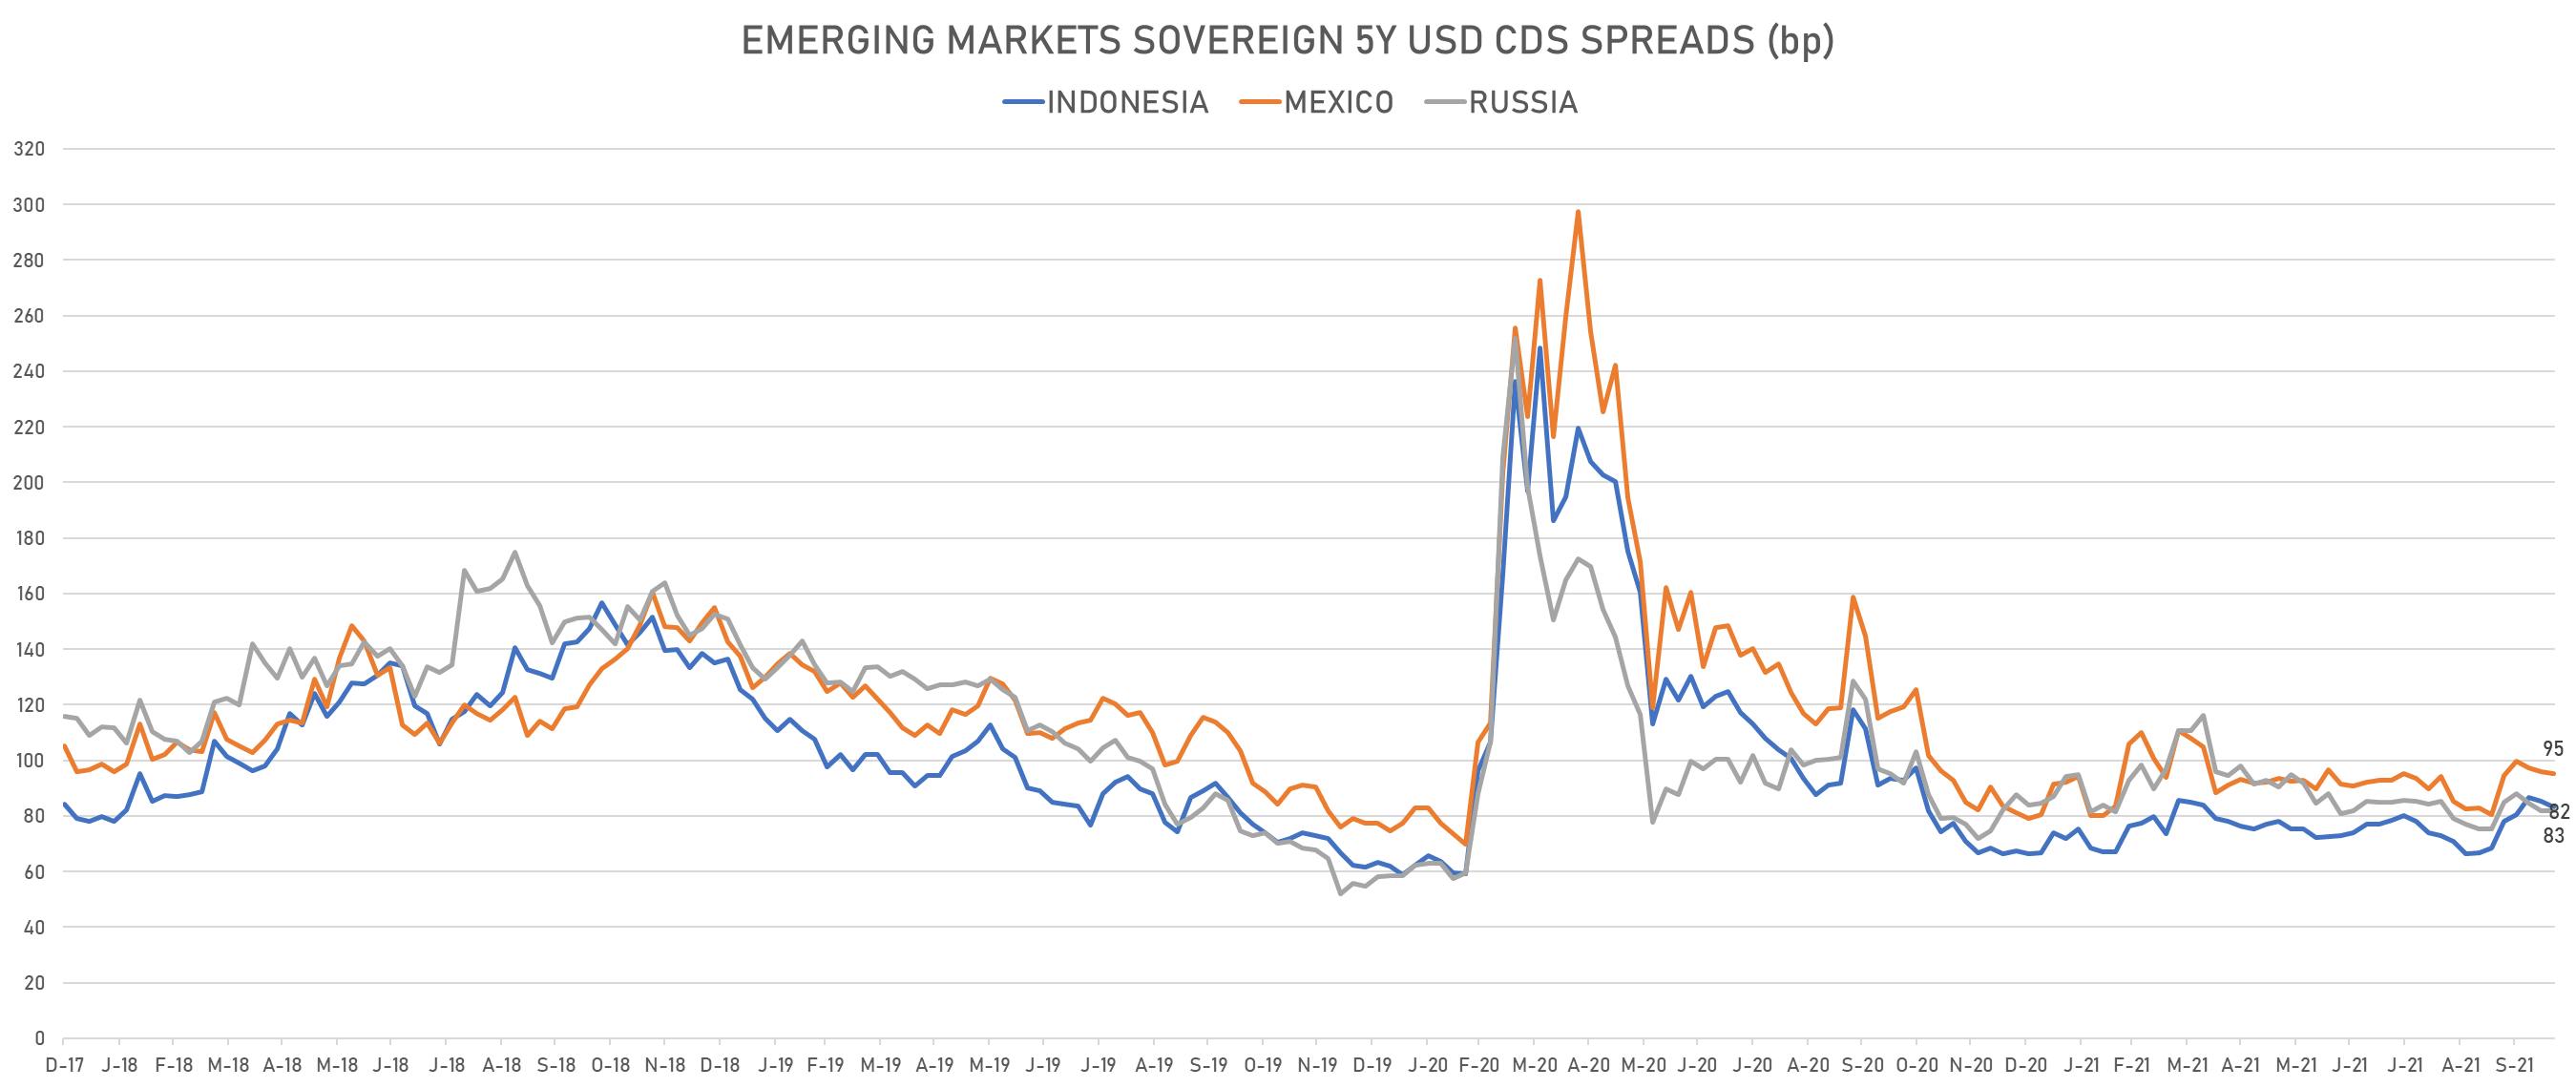 Russia, Indonesia, Mexico 5Y USD CDS Spreads | Sources: phipost.com, Refinitiv data